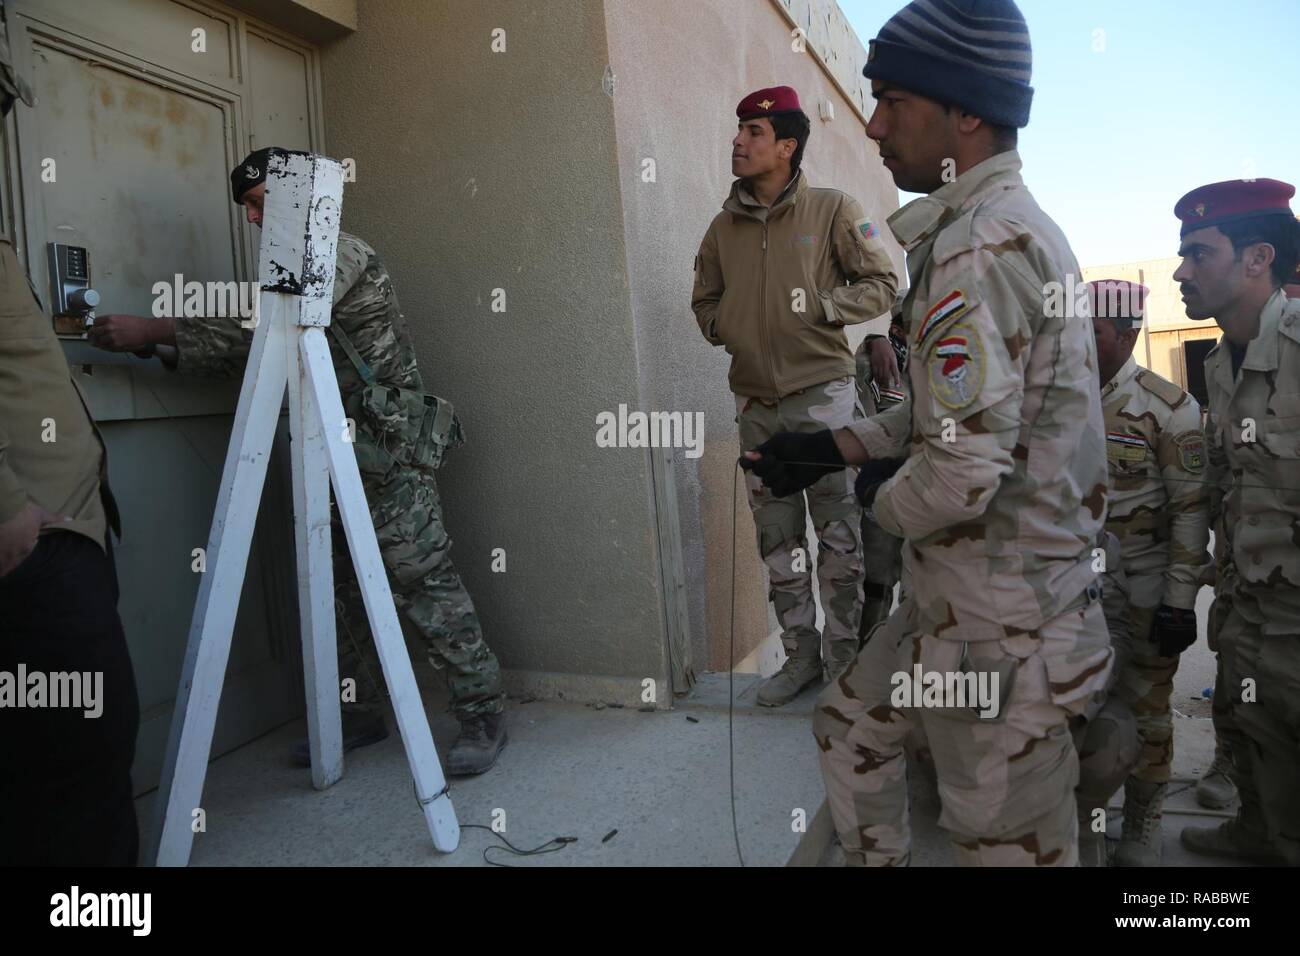 A British trainer assigned to 4th Battalion “The Rifles”  shows Iraqi security forces a method to safely open a door during counter-improvised explosive training at Al Asad Air Base, Iraq, Jan. 12, 2017. This training is part of the overall Combined Joint Task Force – Operation Inherent Resolve building partner capacity mission to train partnered forces fighting ISIL. CJTF-OIR is the global Coalition to defeat ISIL in Iraq and Syria. Stock Photo